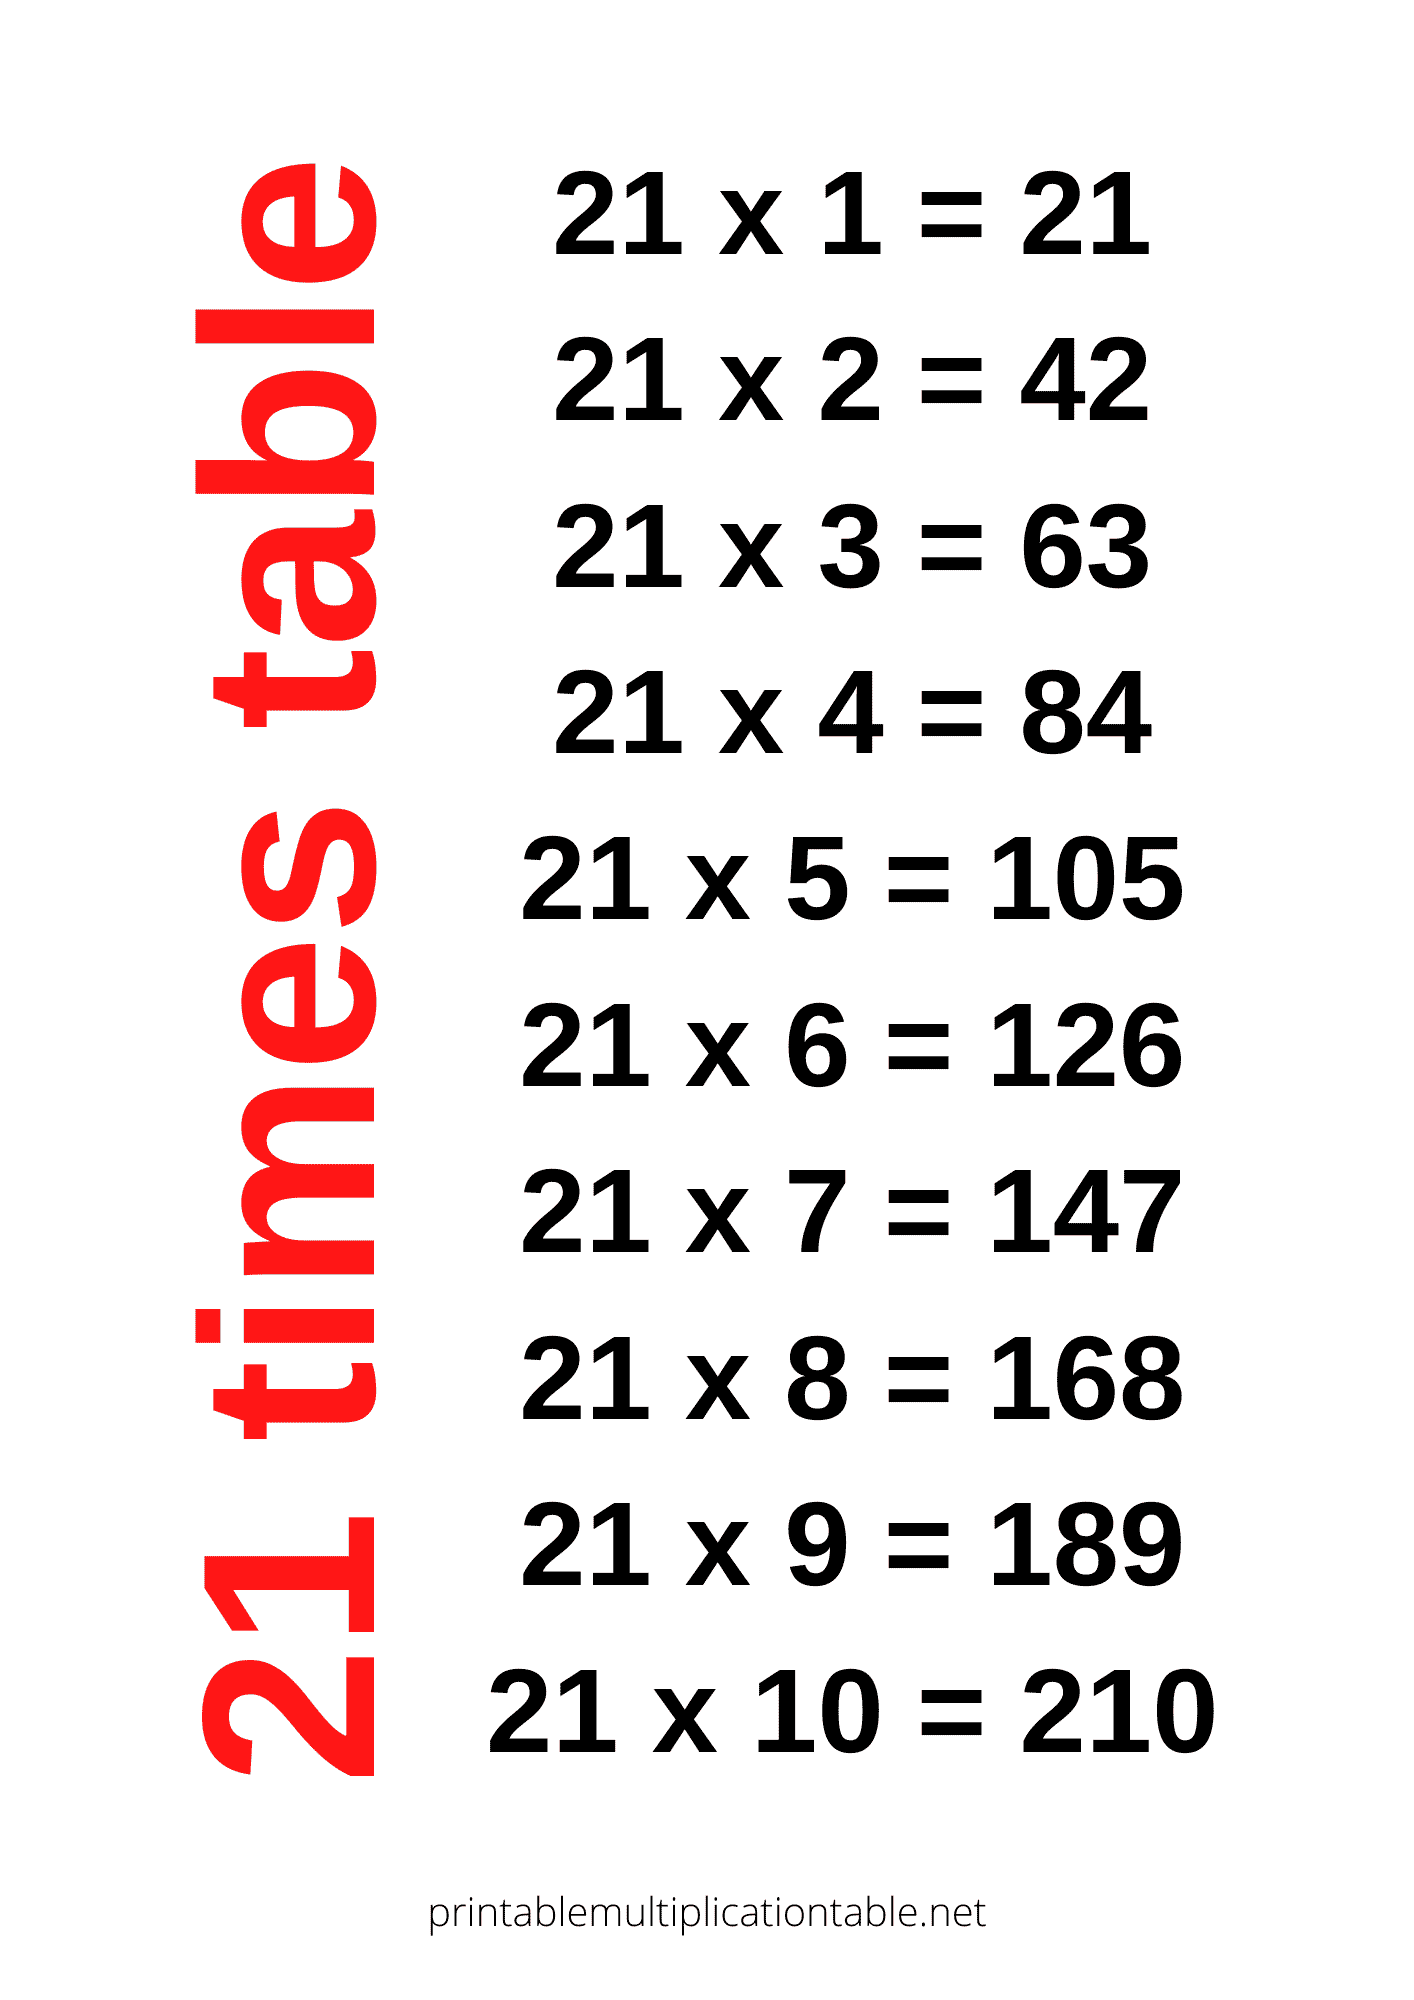 21 times table chart